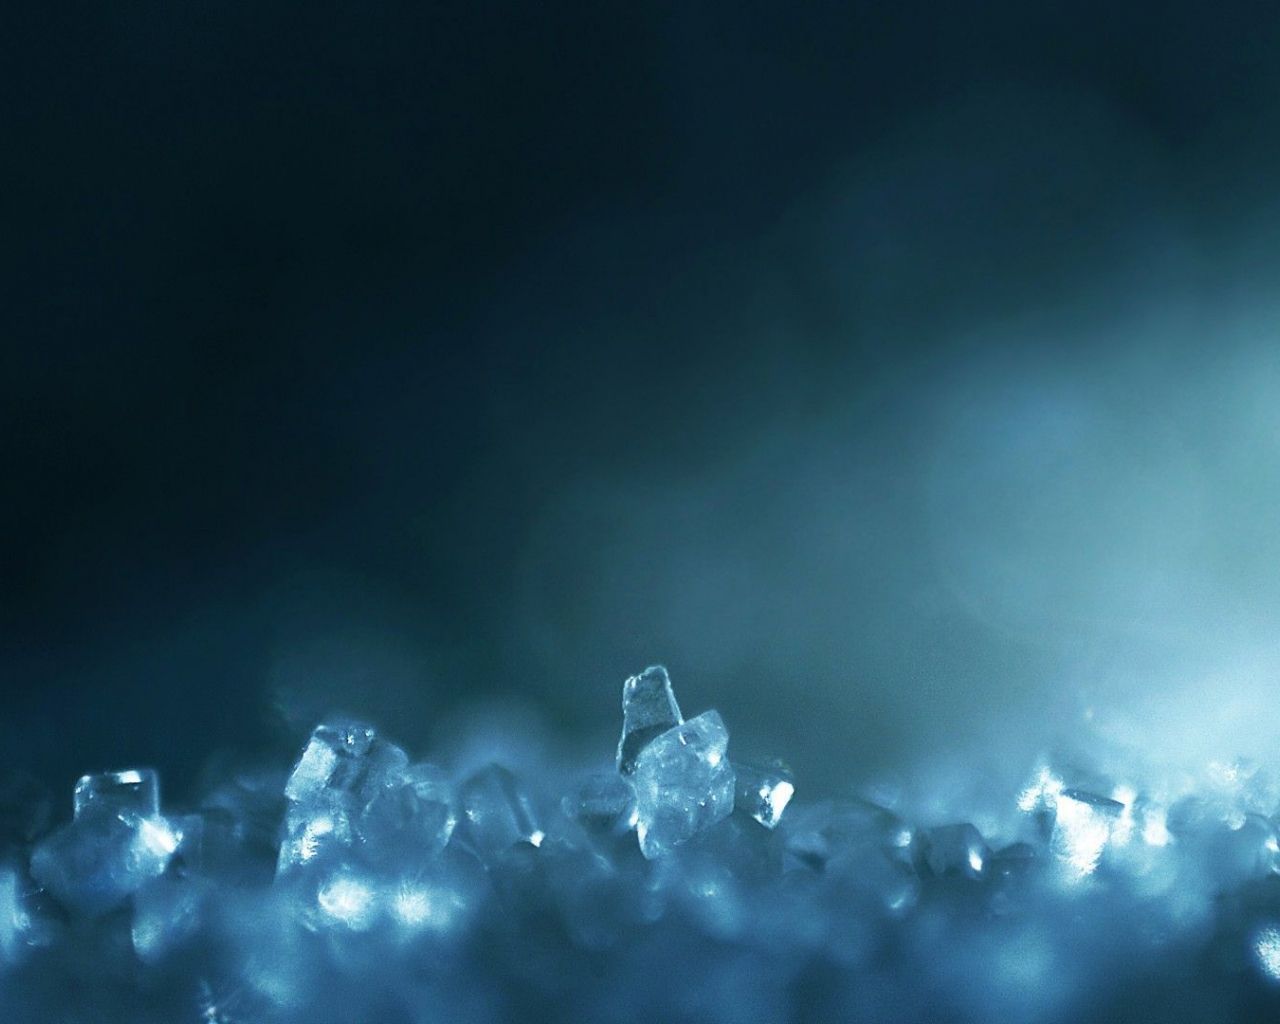 Free download Ice crystals HD Wallpaper 1920x1080 [1920x1080] for your Desktop, Mobile & Tablet. Explore Ice Crystal Wallpaper. Crystal Wallpaper for Walls, Swarovski Crystal Wallpaper, Crystal Wallpaper Desktop